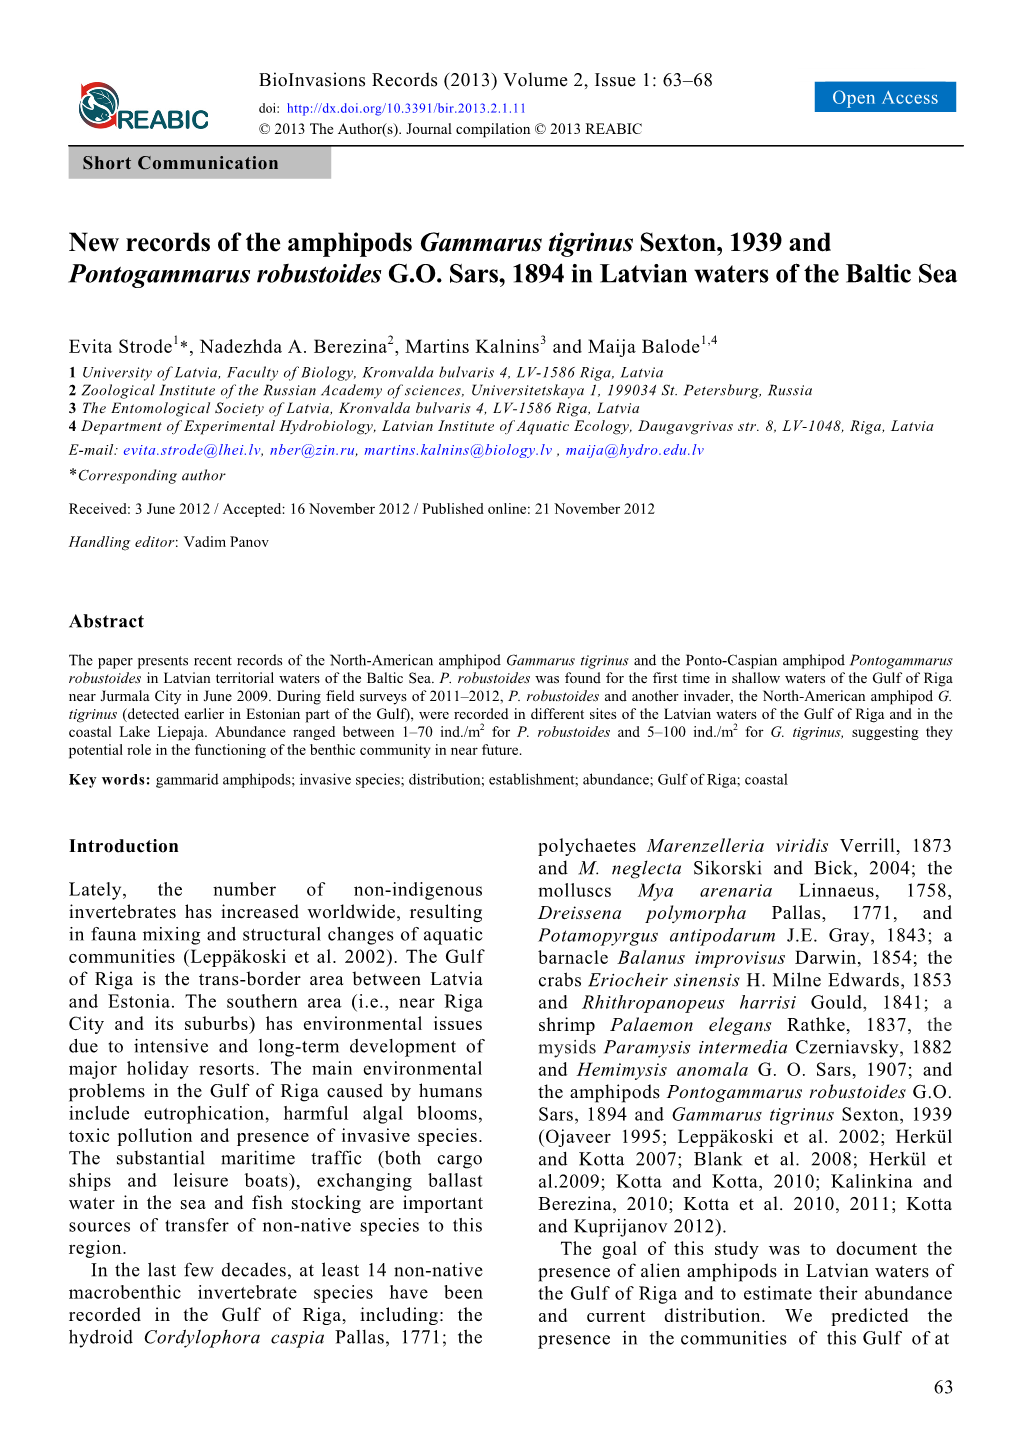 New Records of the Amphipods Gammarus Tigrinus Sexton, 1939 and Pontogammarus Robustoides G.O